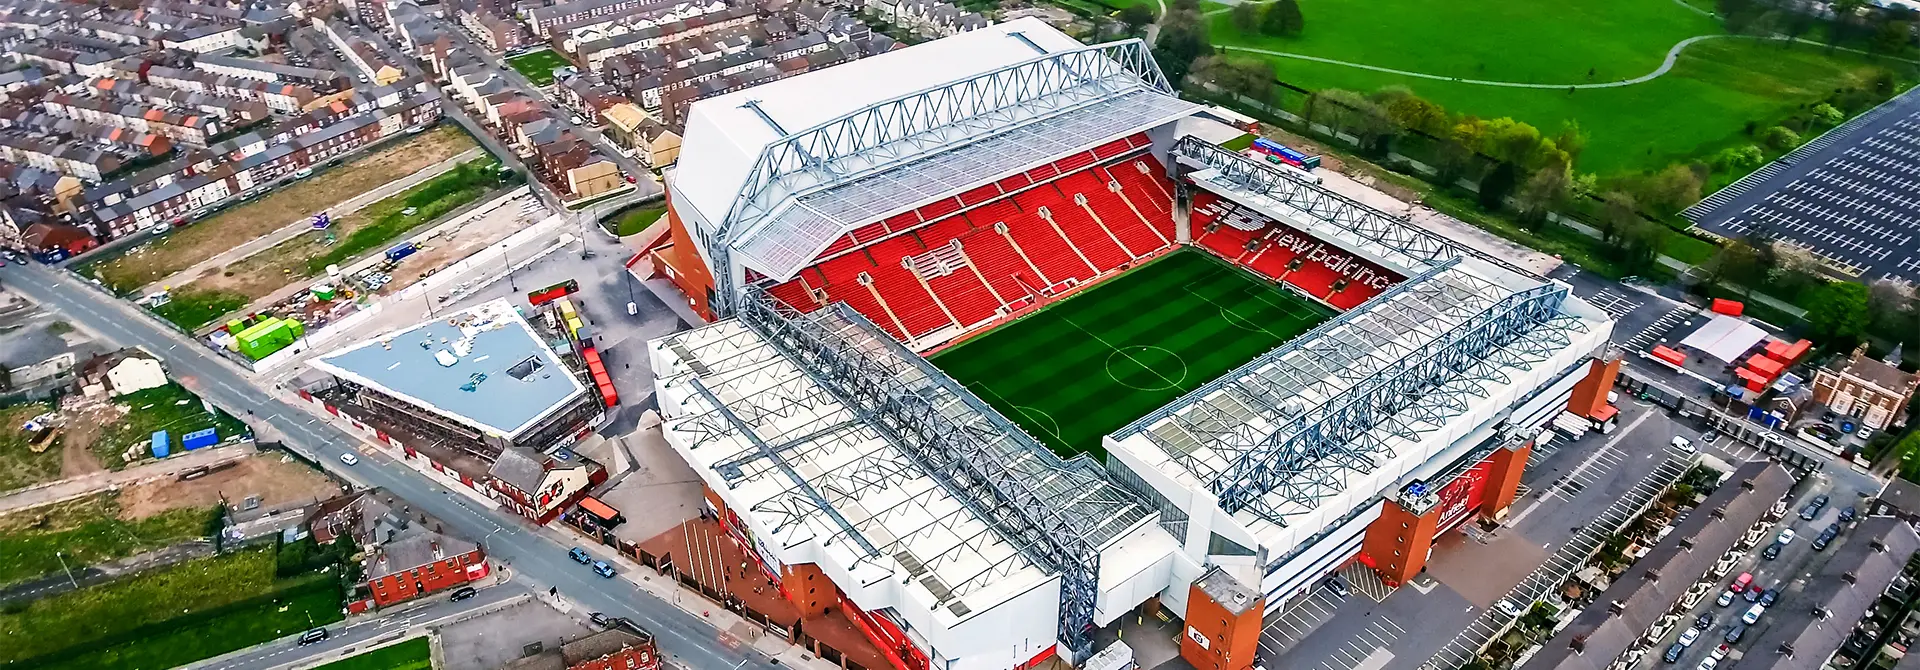 anfield_road_1920x670